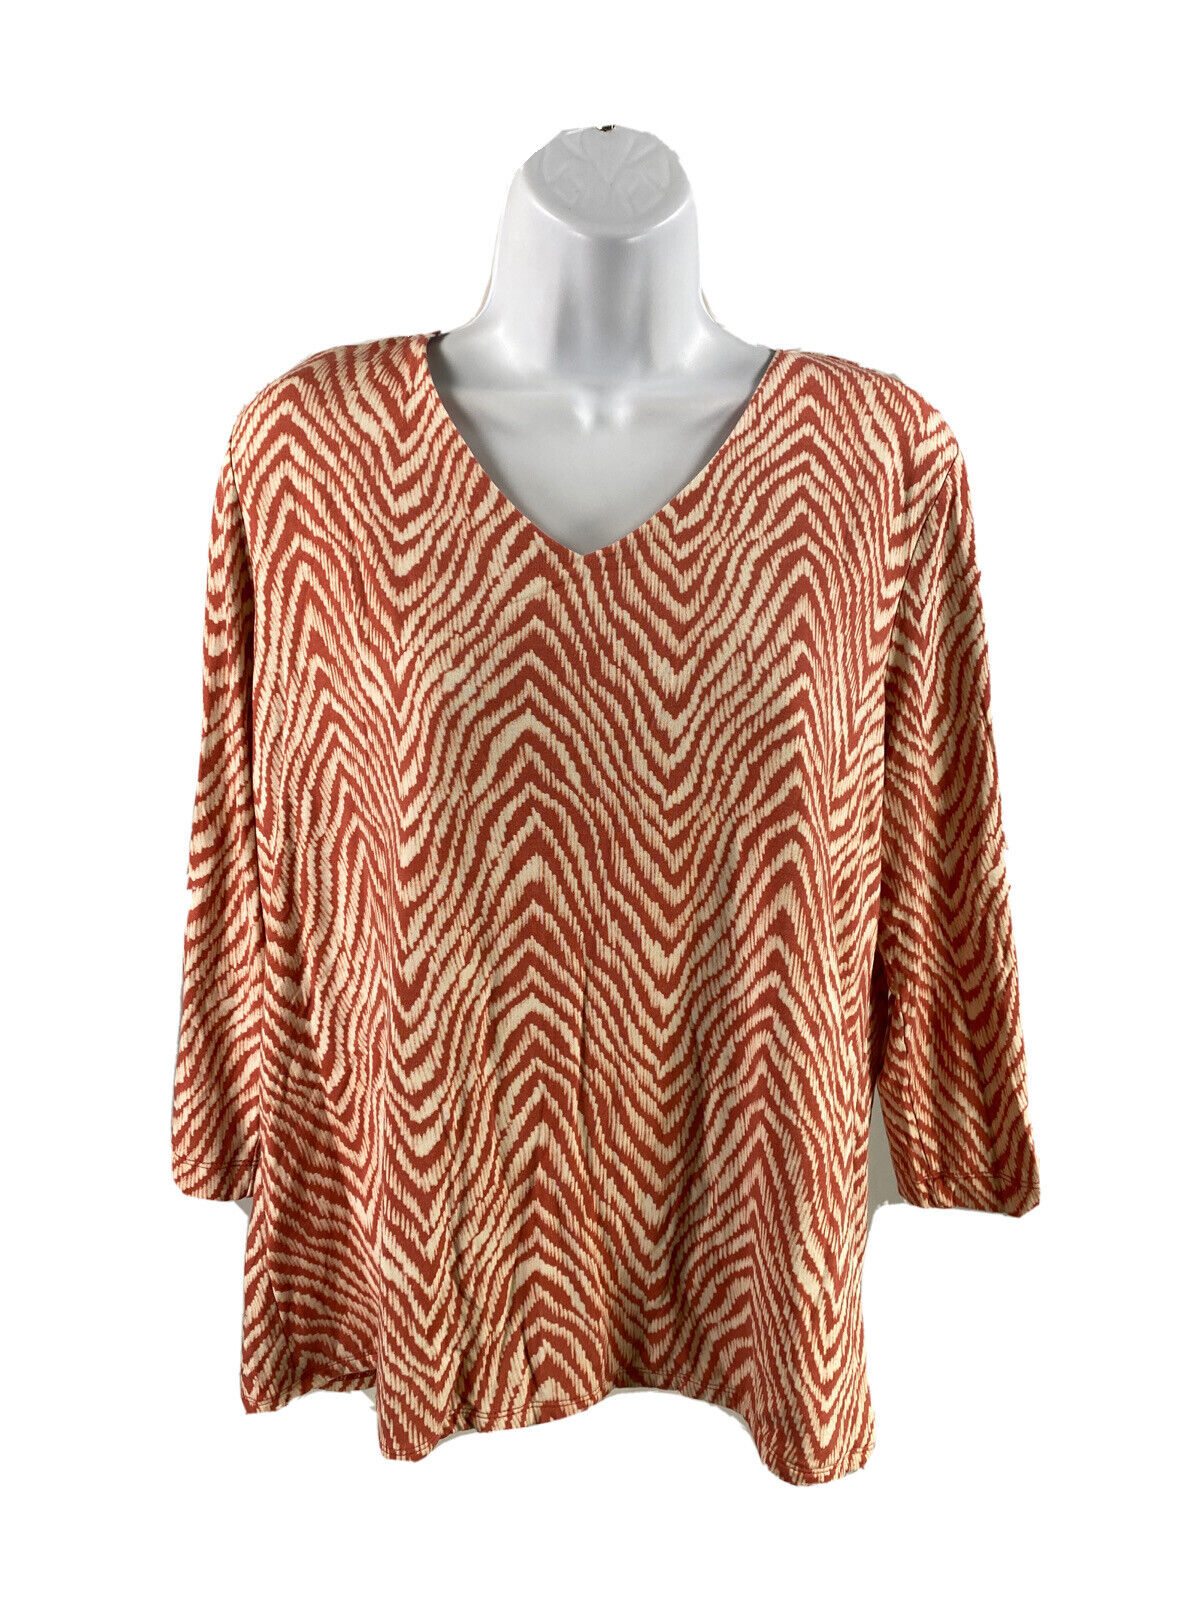 Chico's Women's Pink Tribal V-Neck 3/4 Sleeve Rayon Casual Top Sz 2/L